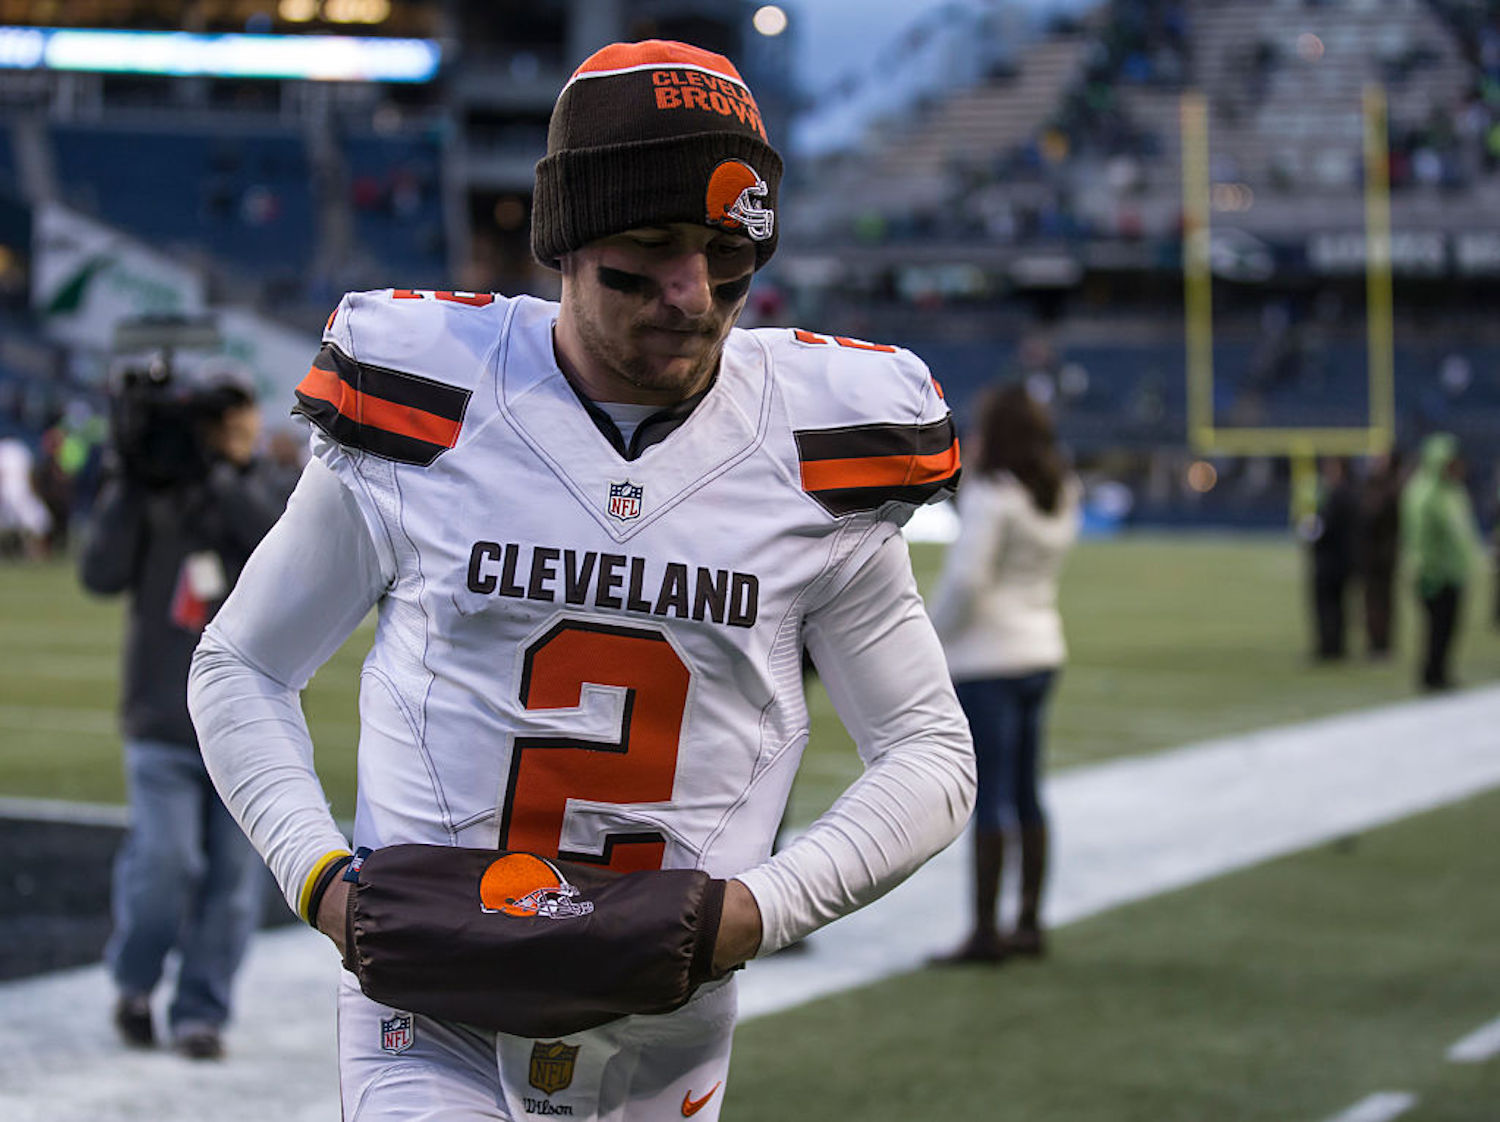 Johnny Manziel inexplicably trolled the Browns after their playoff loss against the Chiefs, which didn't sit right with Cleveland fans.